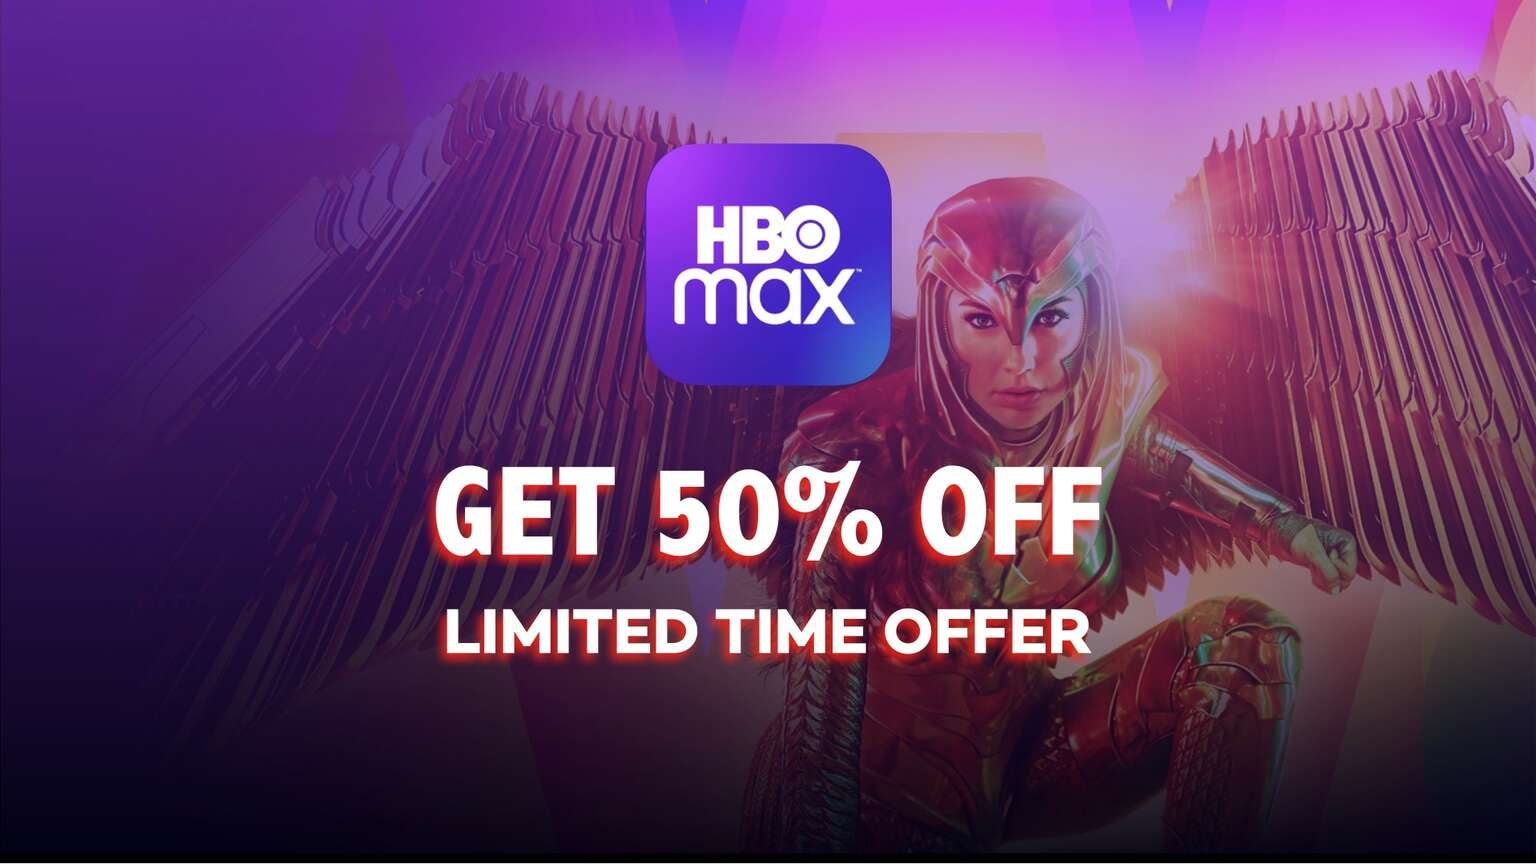 LAST CHANCE Get HBO Max AdFree For Just 7.49 a Month For 6 Months (50 OFF) Until Tonight